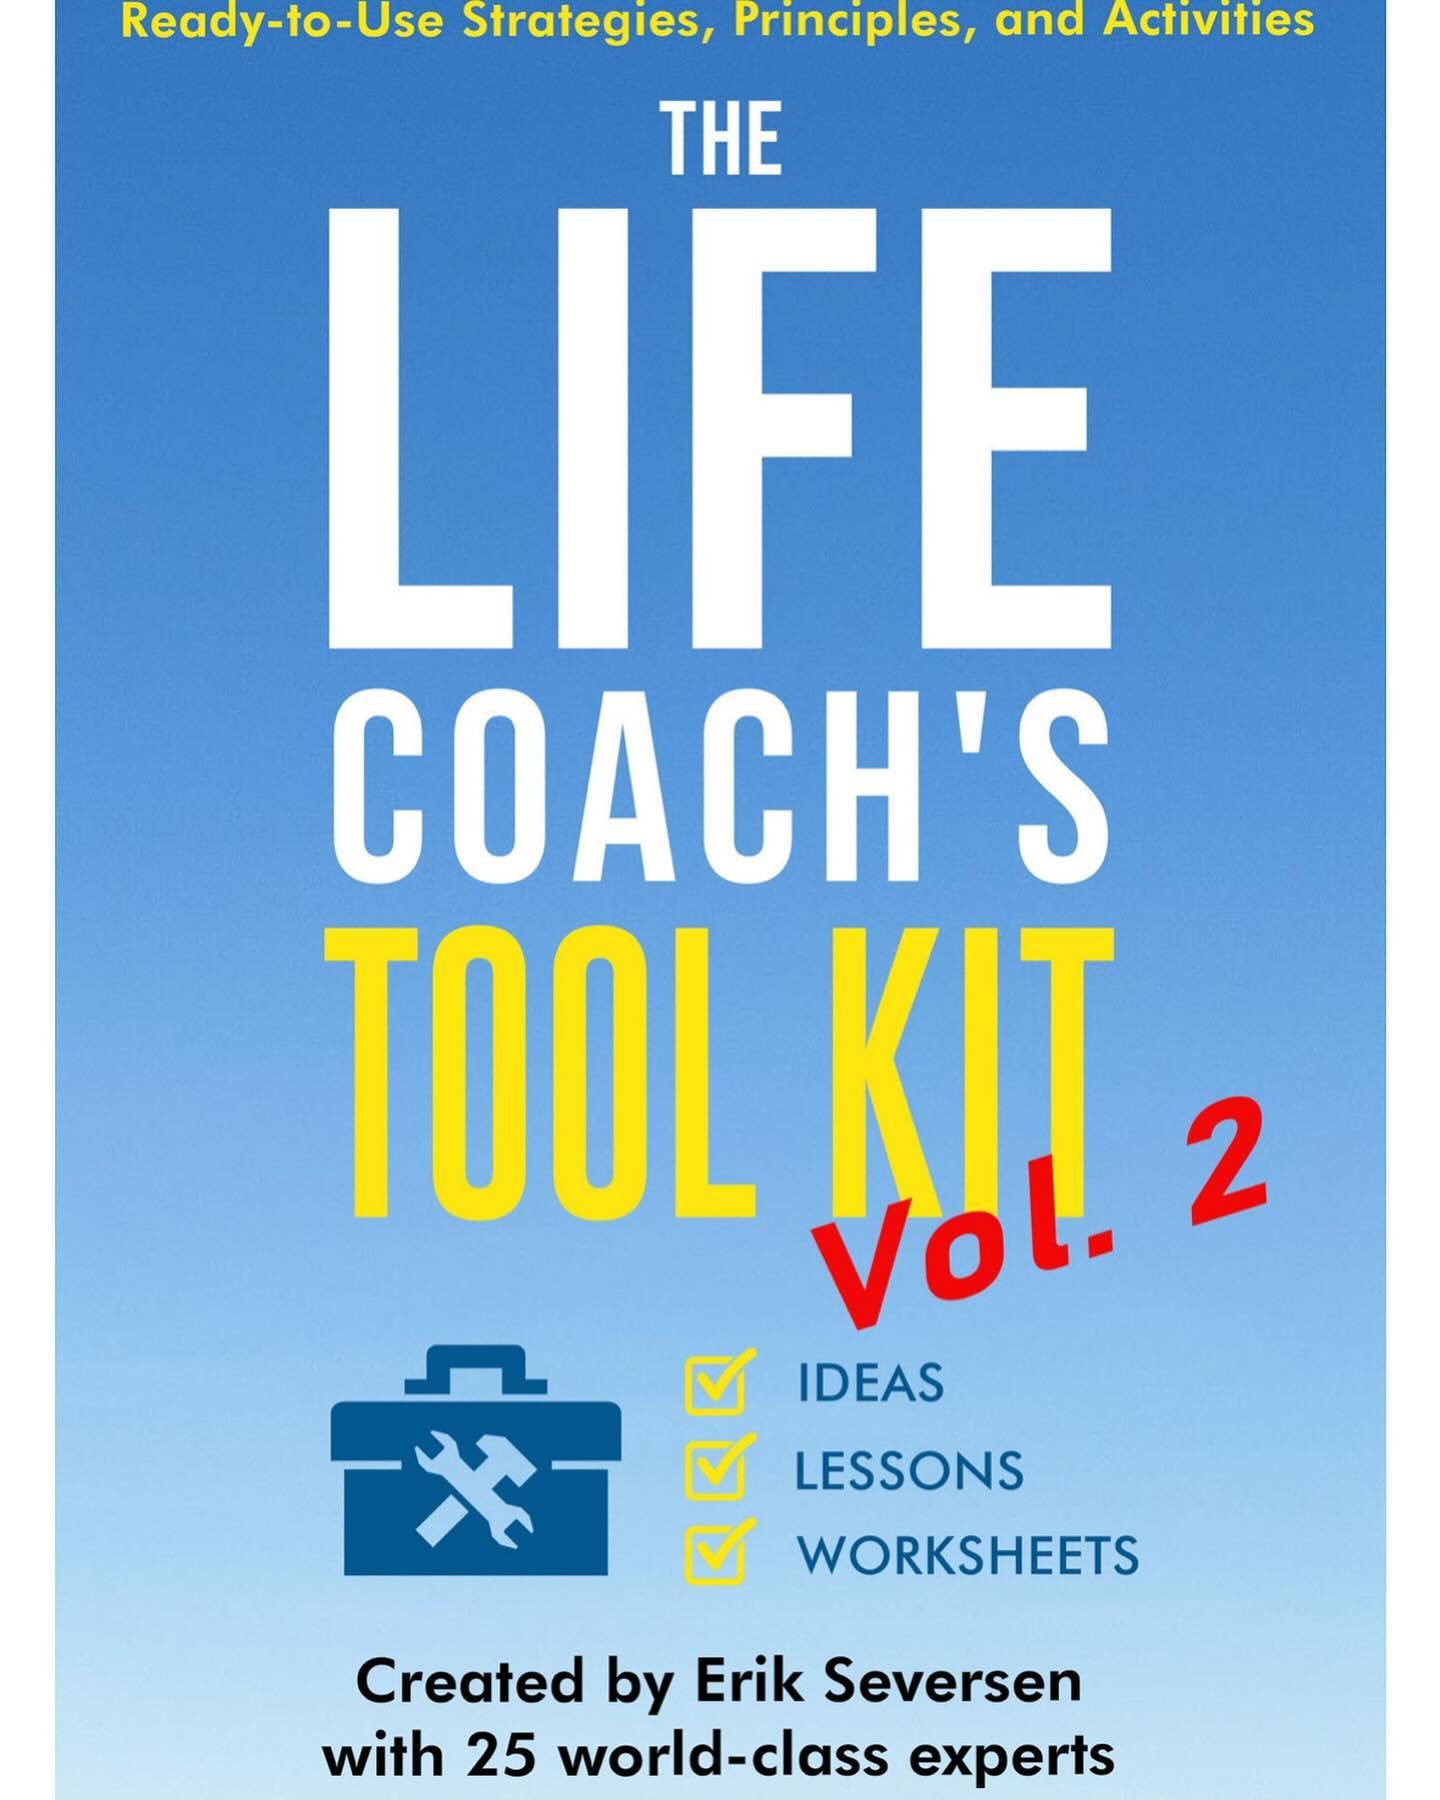 24 world class experts wrote a chapter for this book&hellip;

&hellip;and me! 😉

I say this not to play down my role in this impactful collection of tools and strategies to help coaches coach and non-coaches coach themselves. 

I say it because I&rs